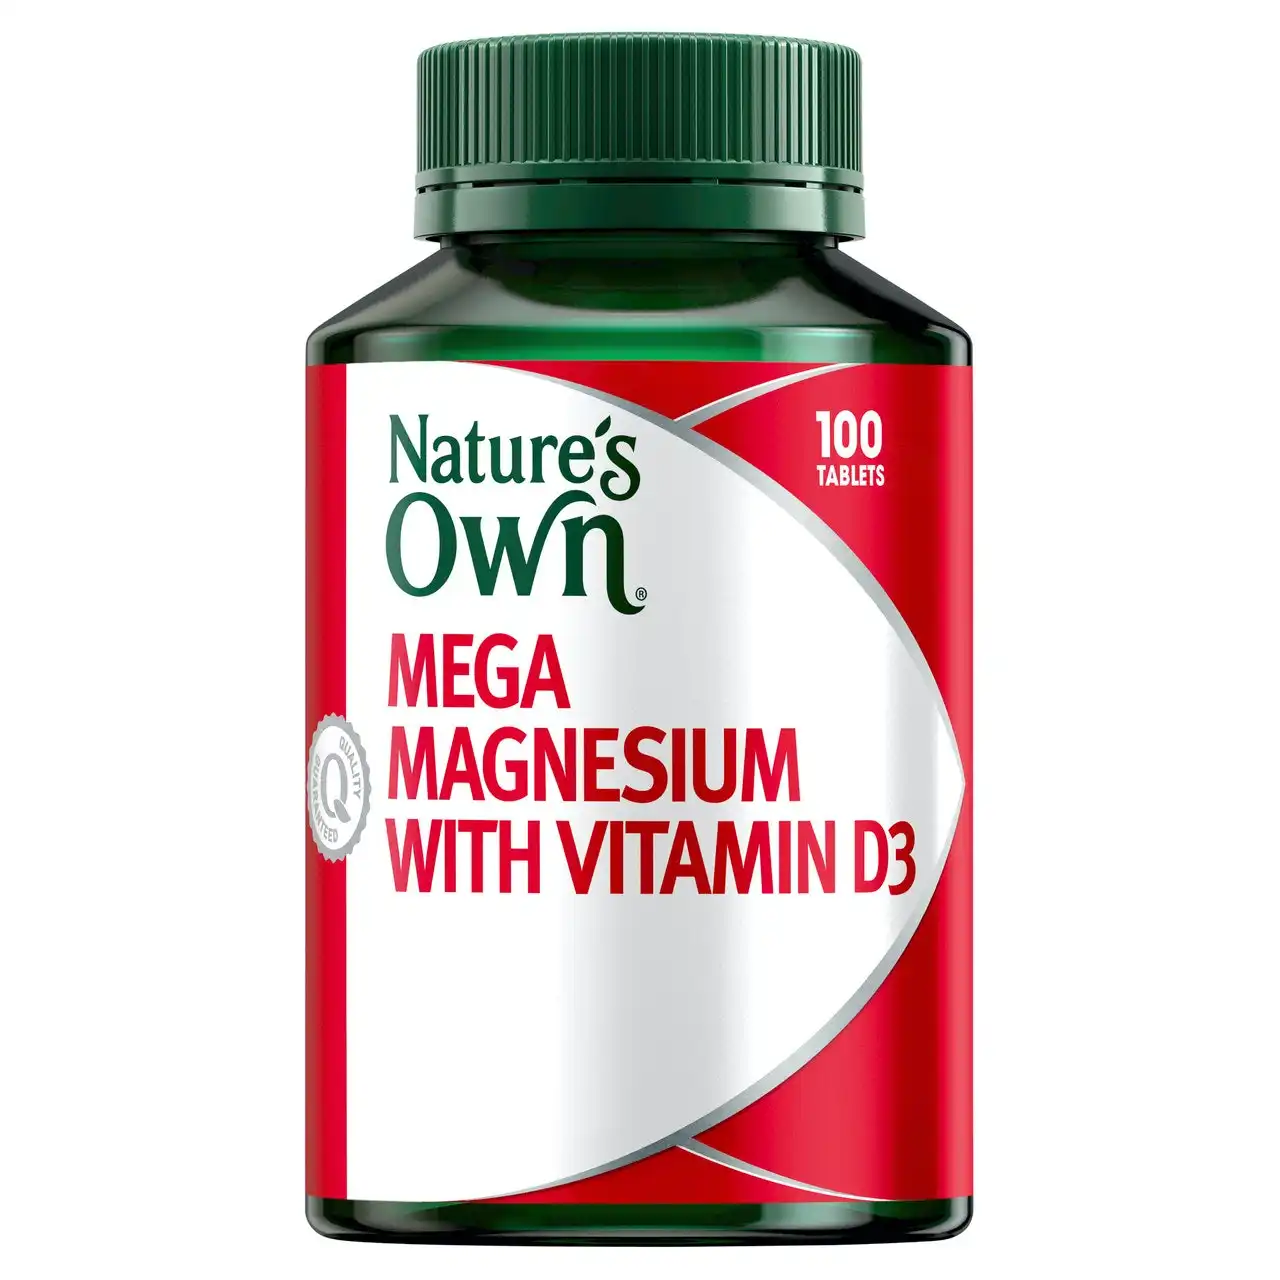 Nature's Own Mega Magnesium with Vitamin D3 100 Tablets